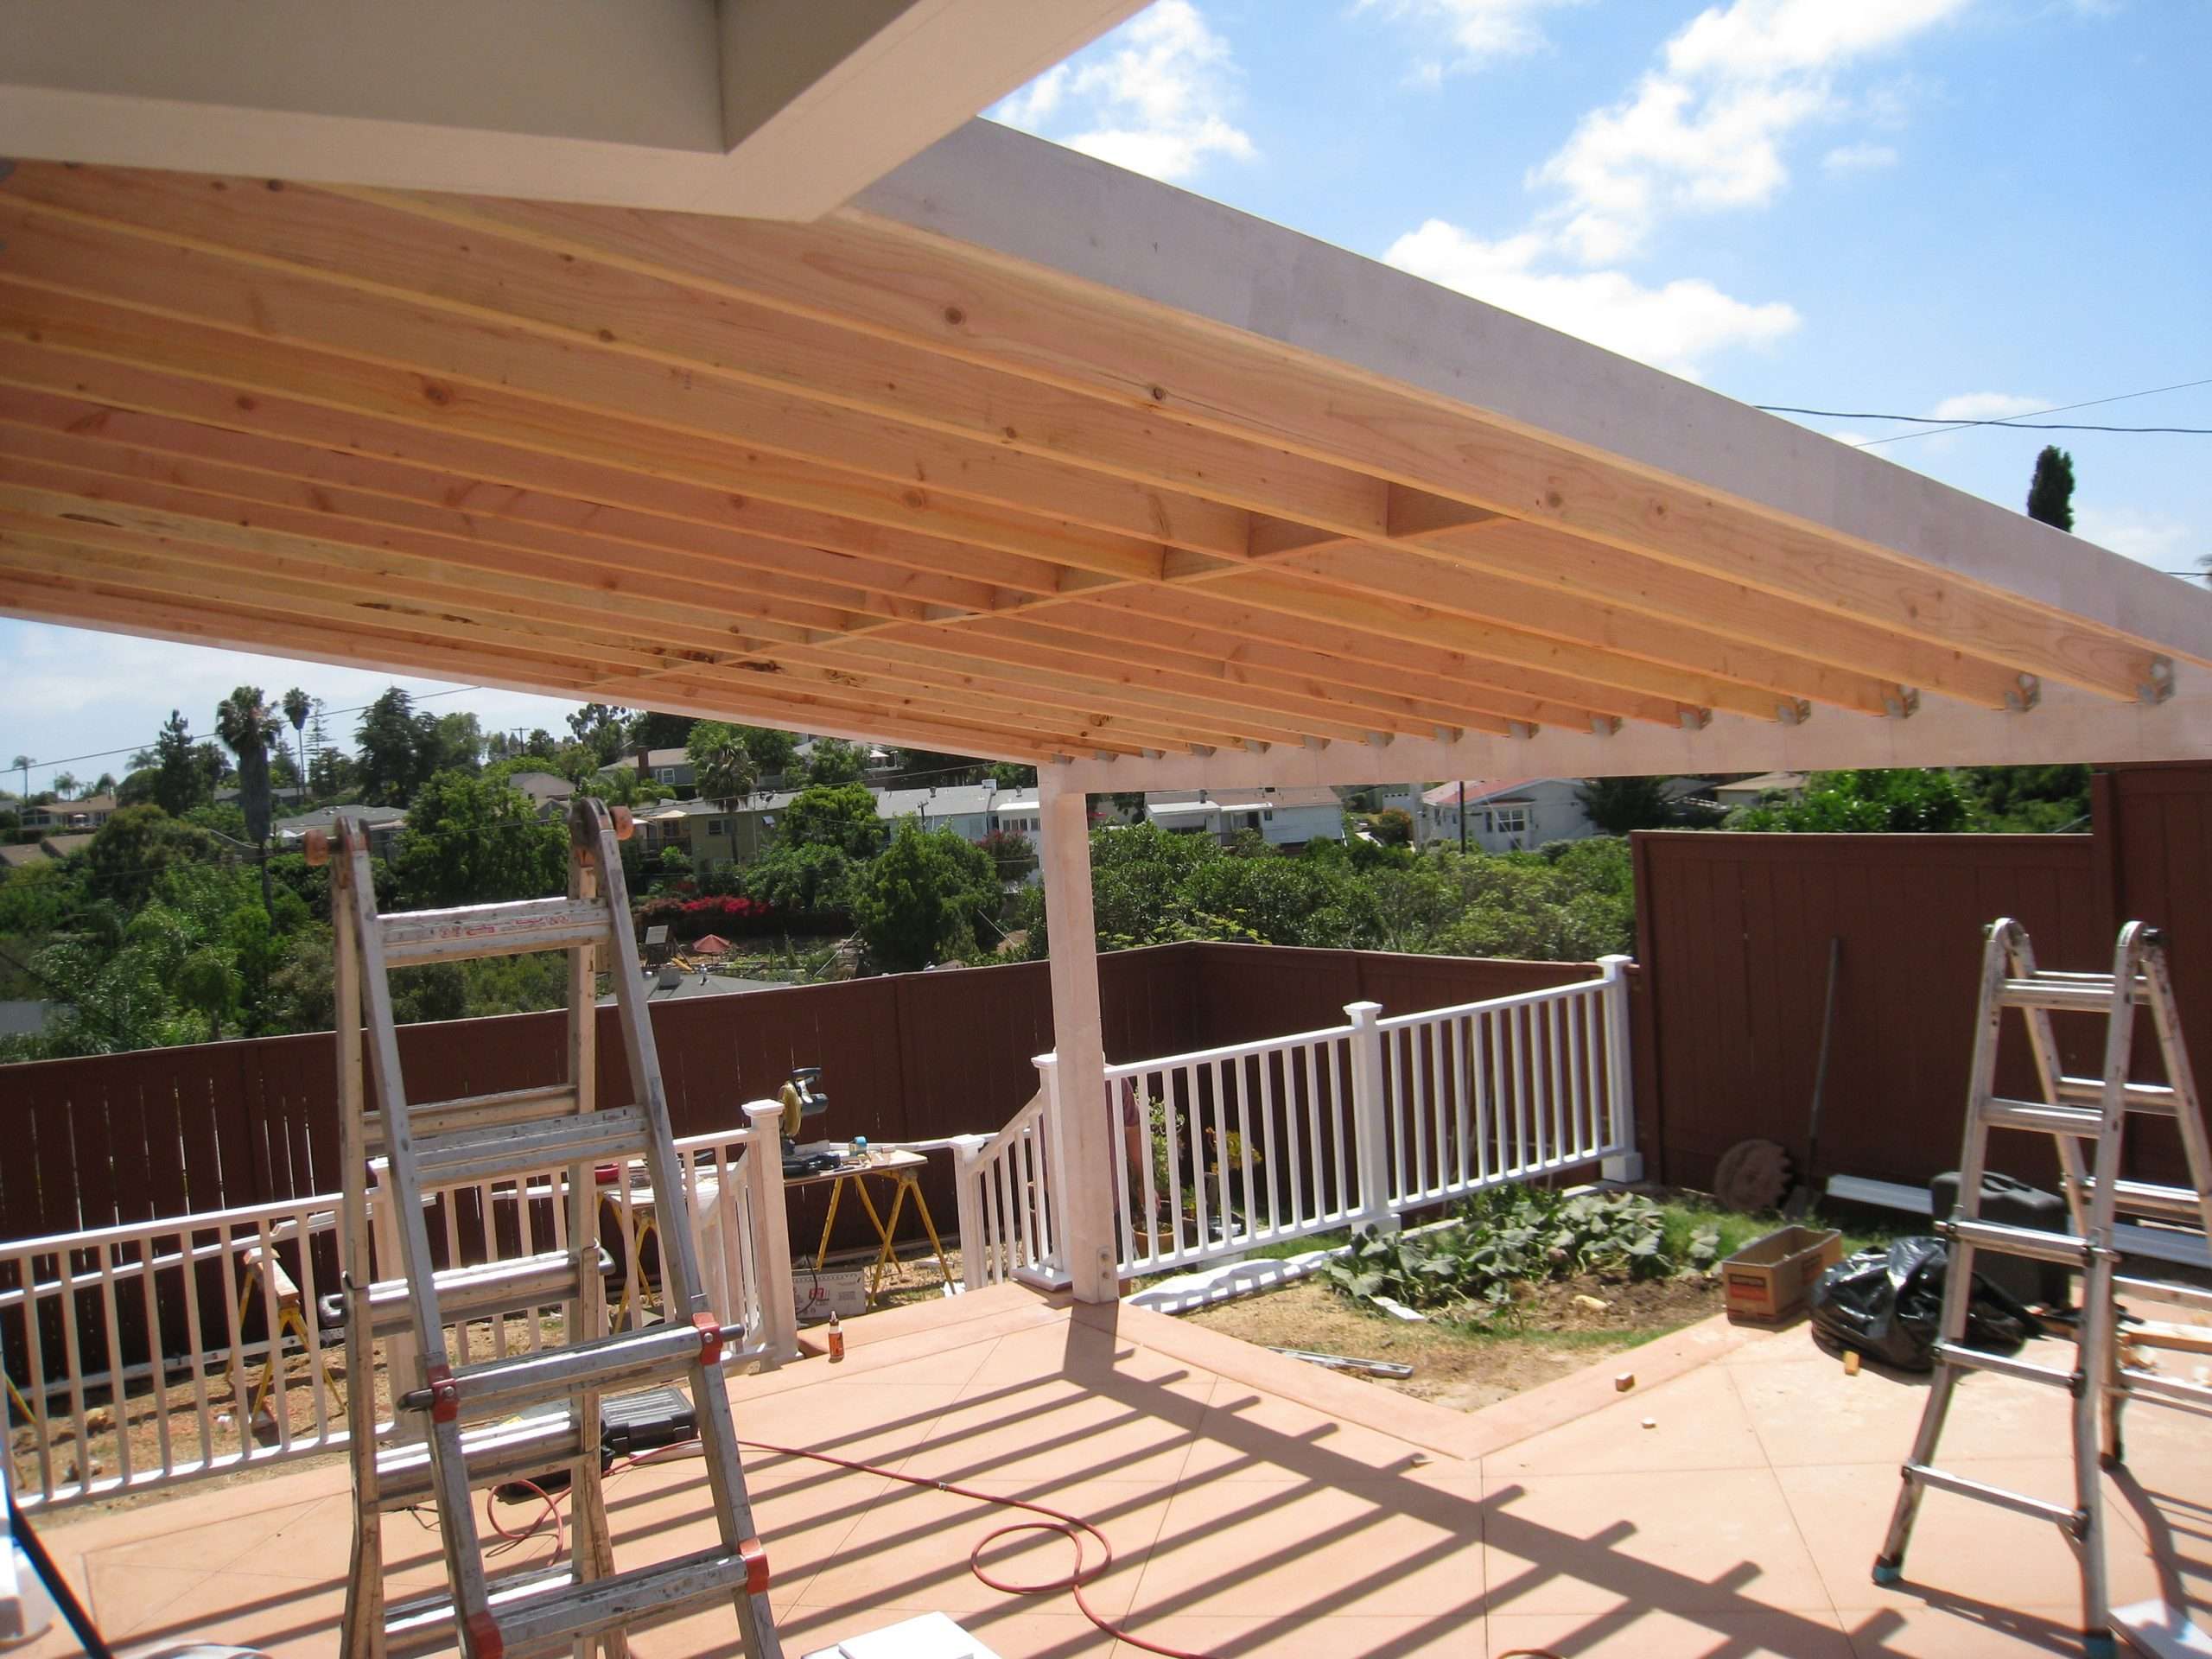 Types Of Wood Patio Covers â¢ Patio Ideas